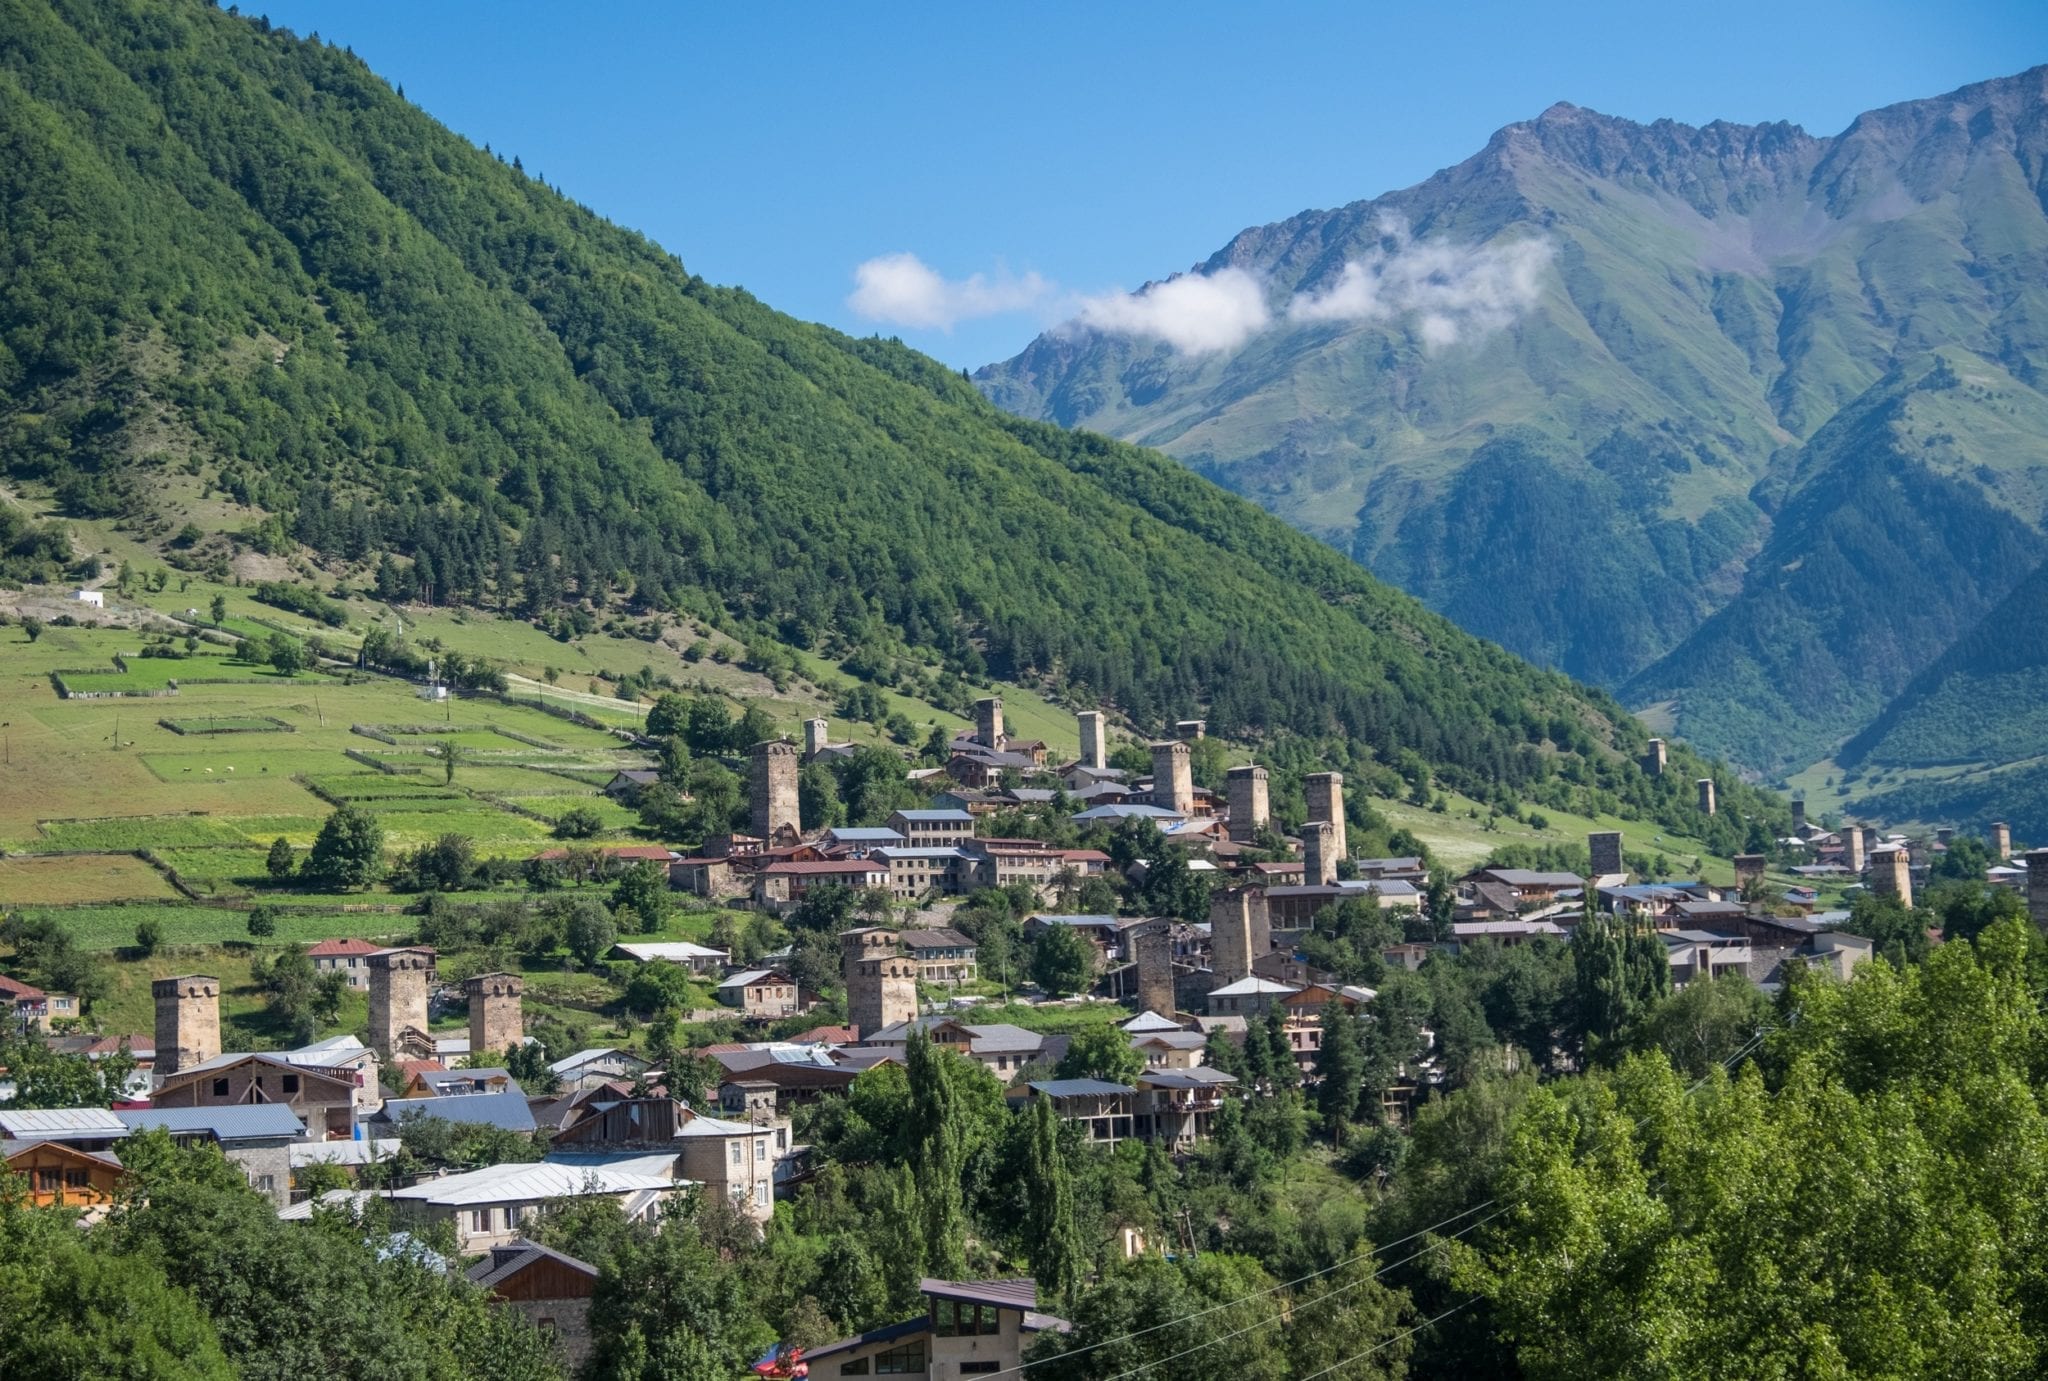 A village of stone towers in the foreground and mountains in the background in Mestia, Svaneti.